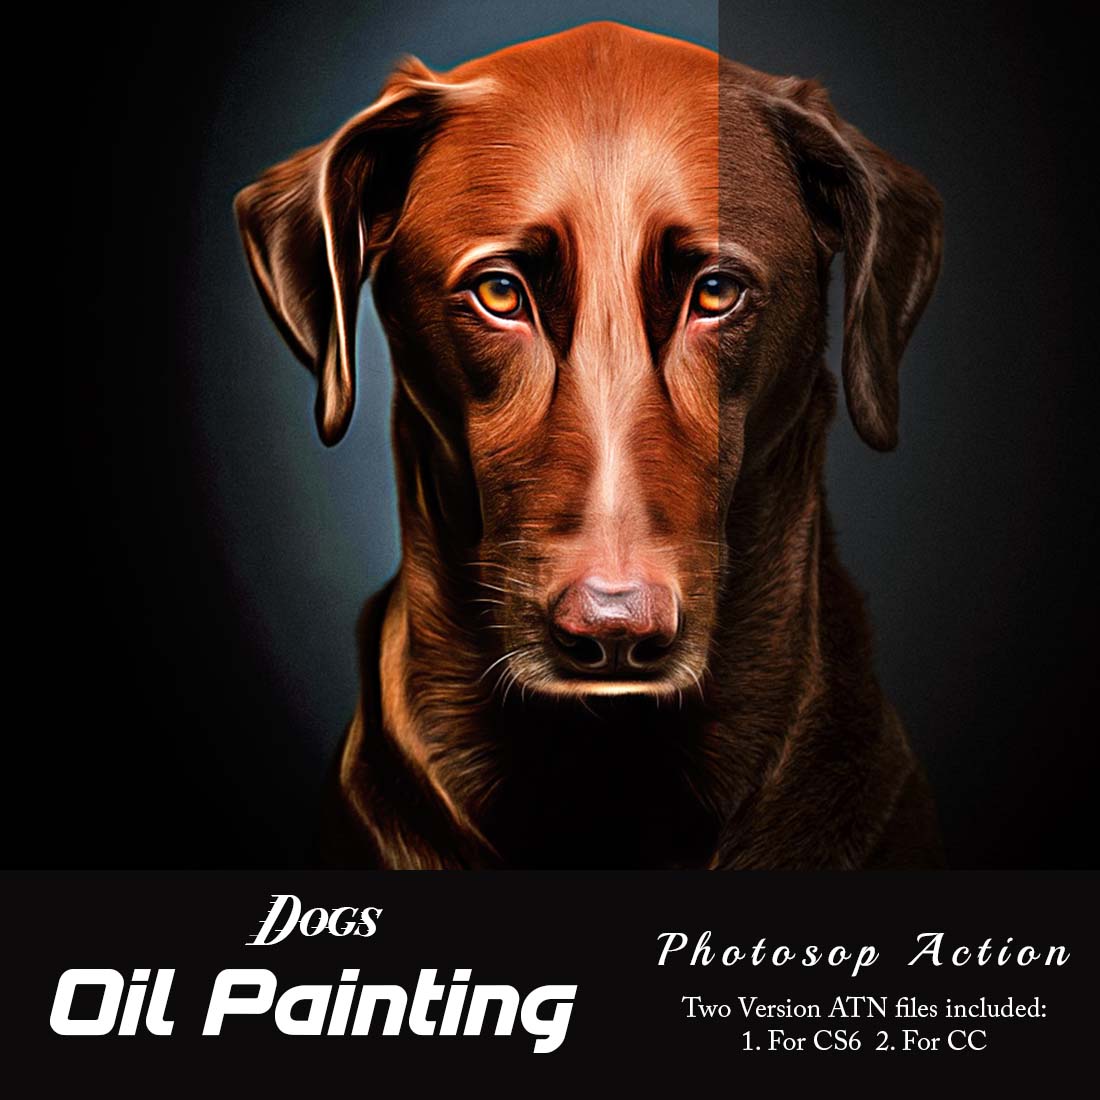 Dogs Oil Painting Photoshop Action cover image.